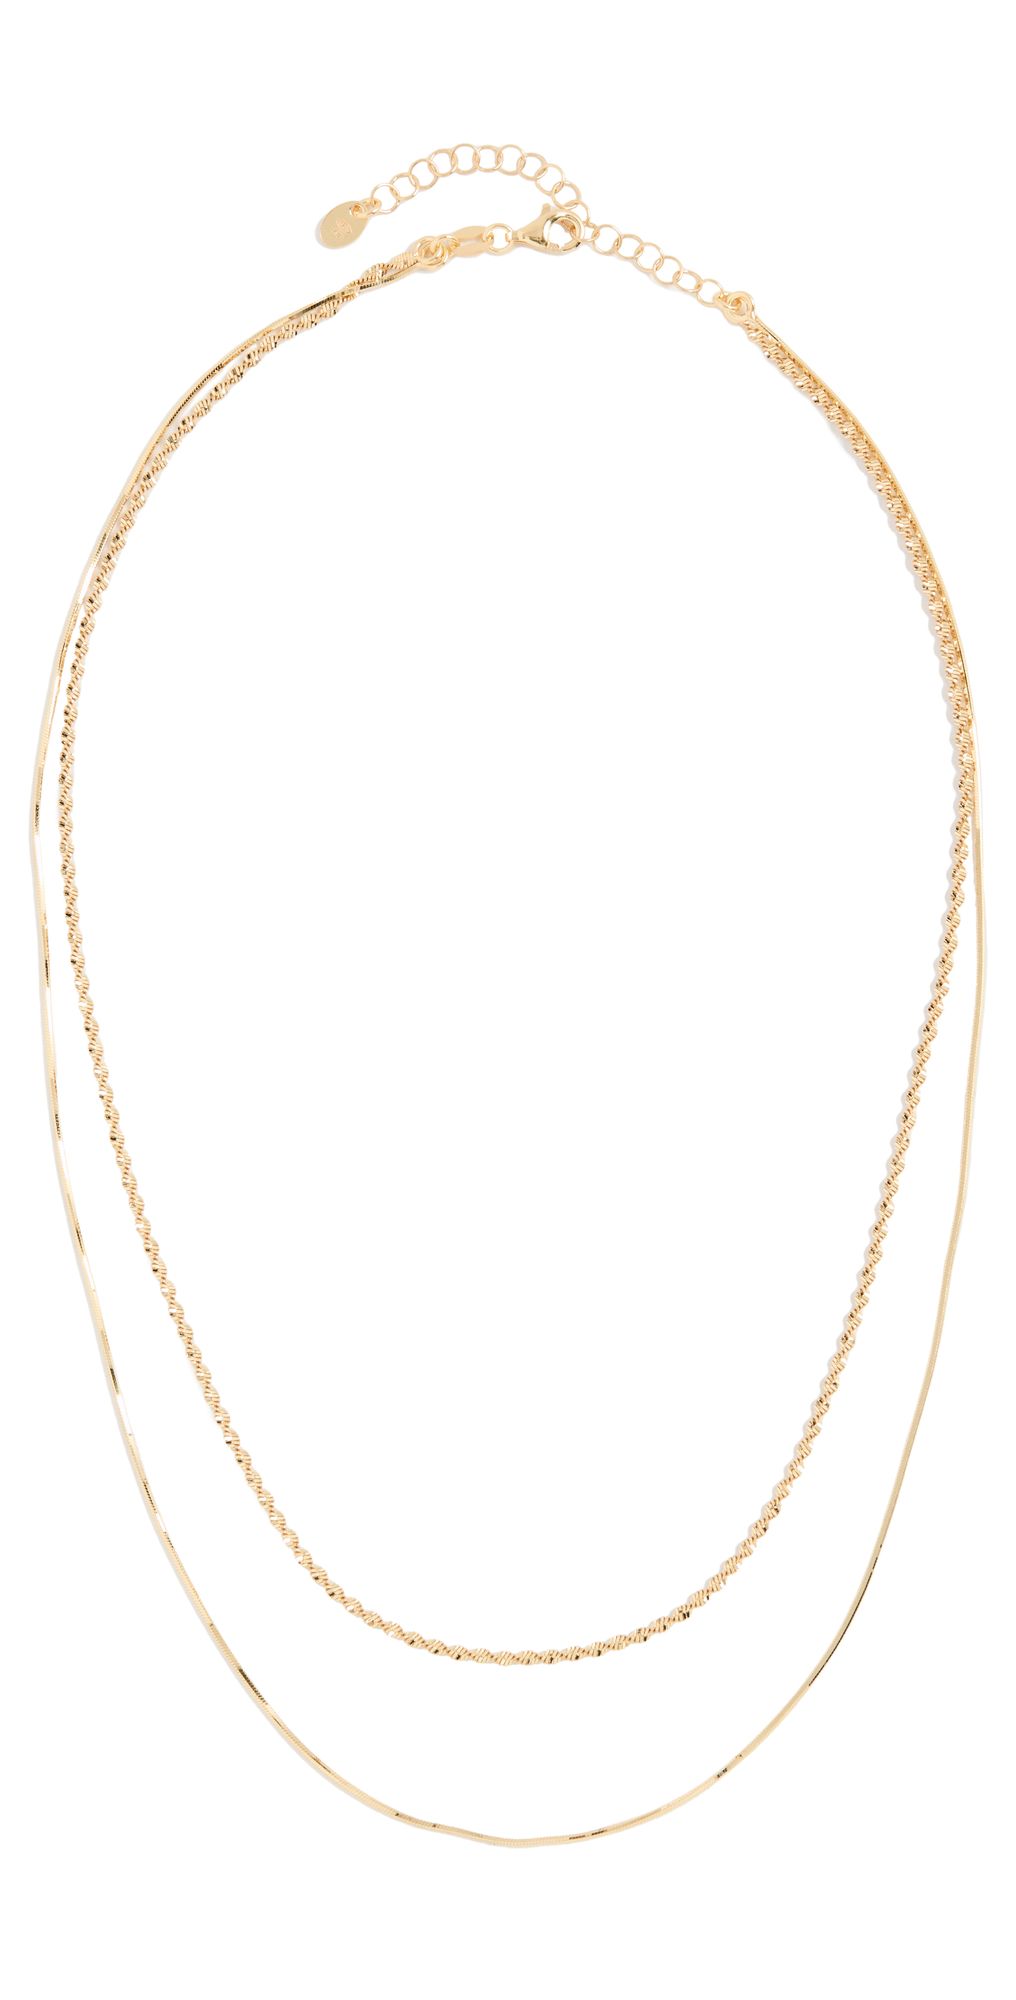 Layered Slinky Chain Necklace | Shopbop